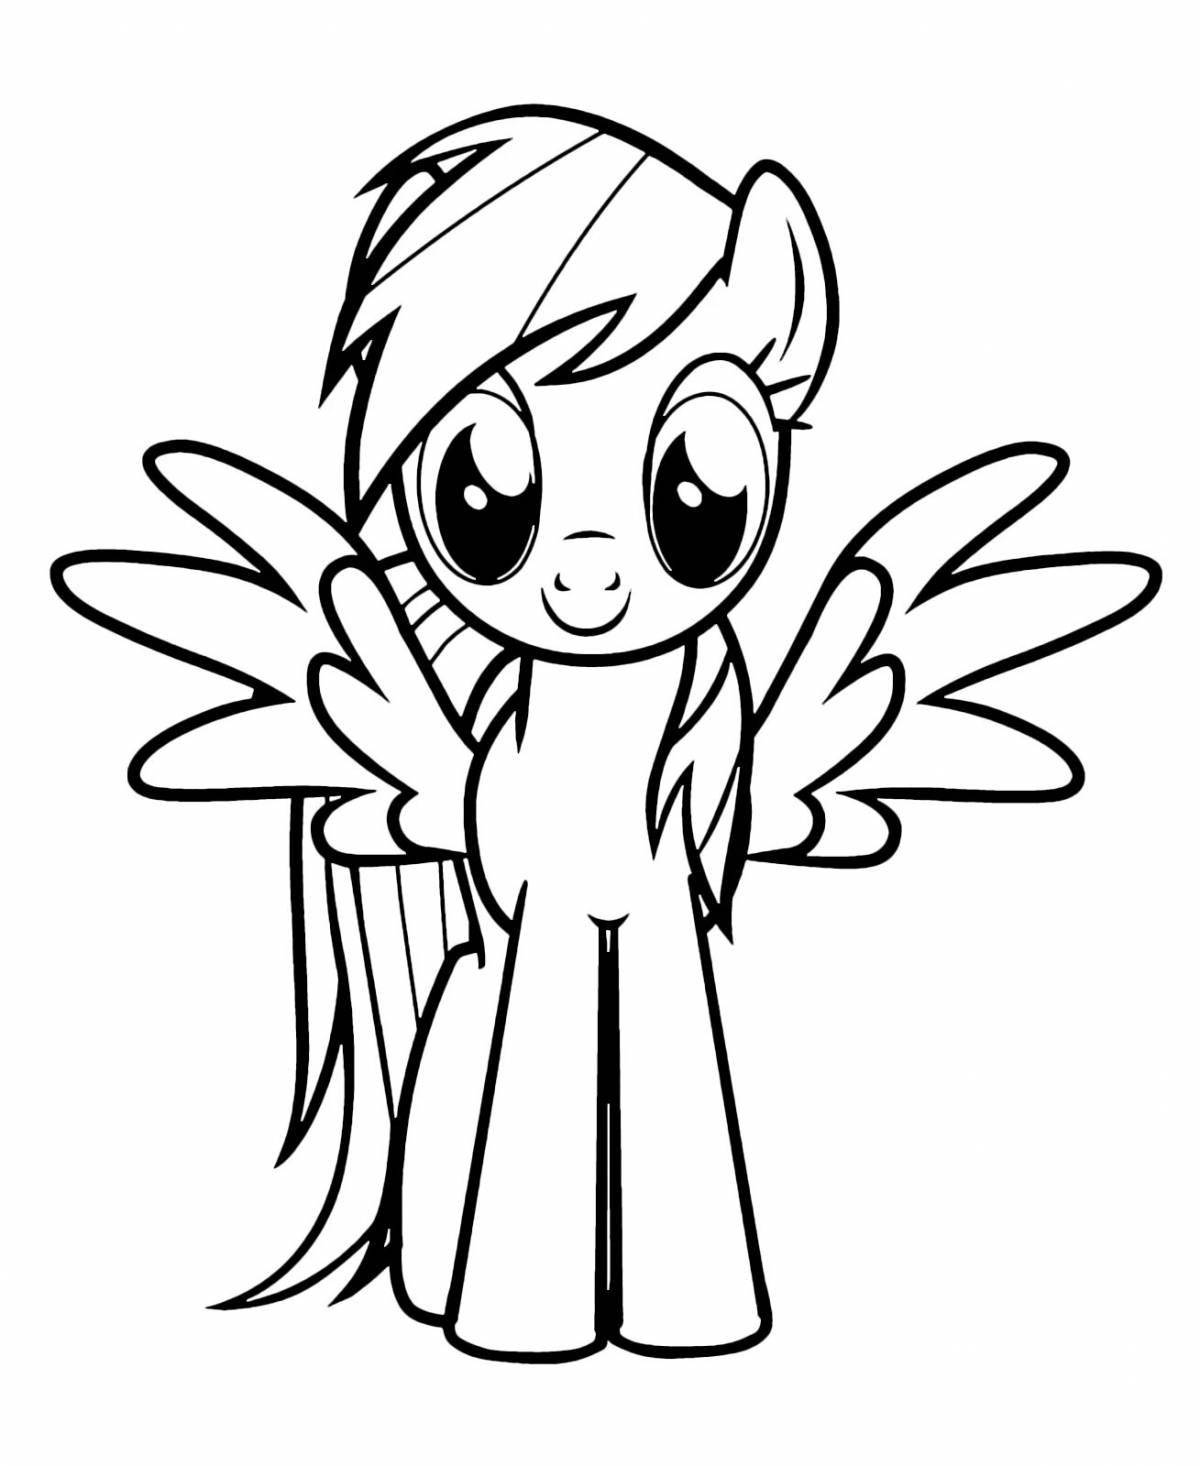 Glittering rainbow dash coloring page